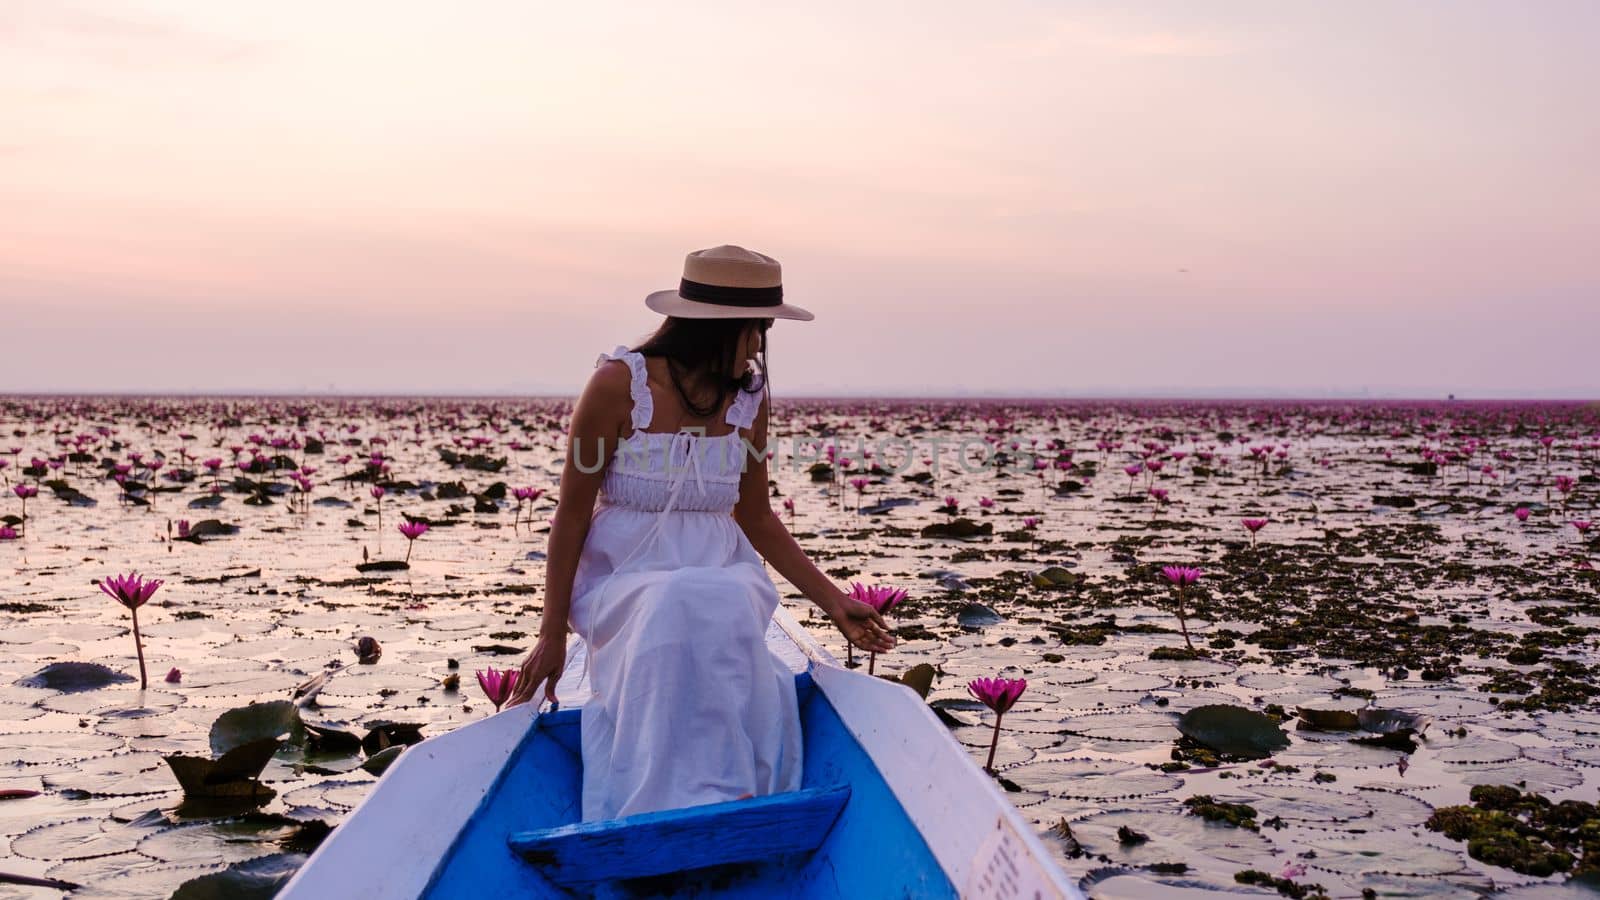 Asian women with a hat in a boat at the Red Lotus Sea full of pink flowers in Udon Thani Thailand. by fokkebok